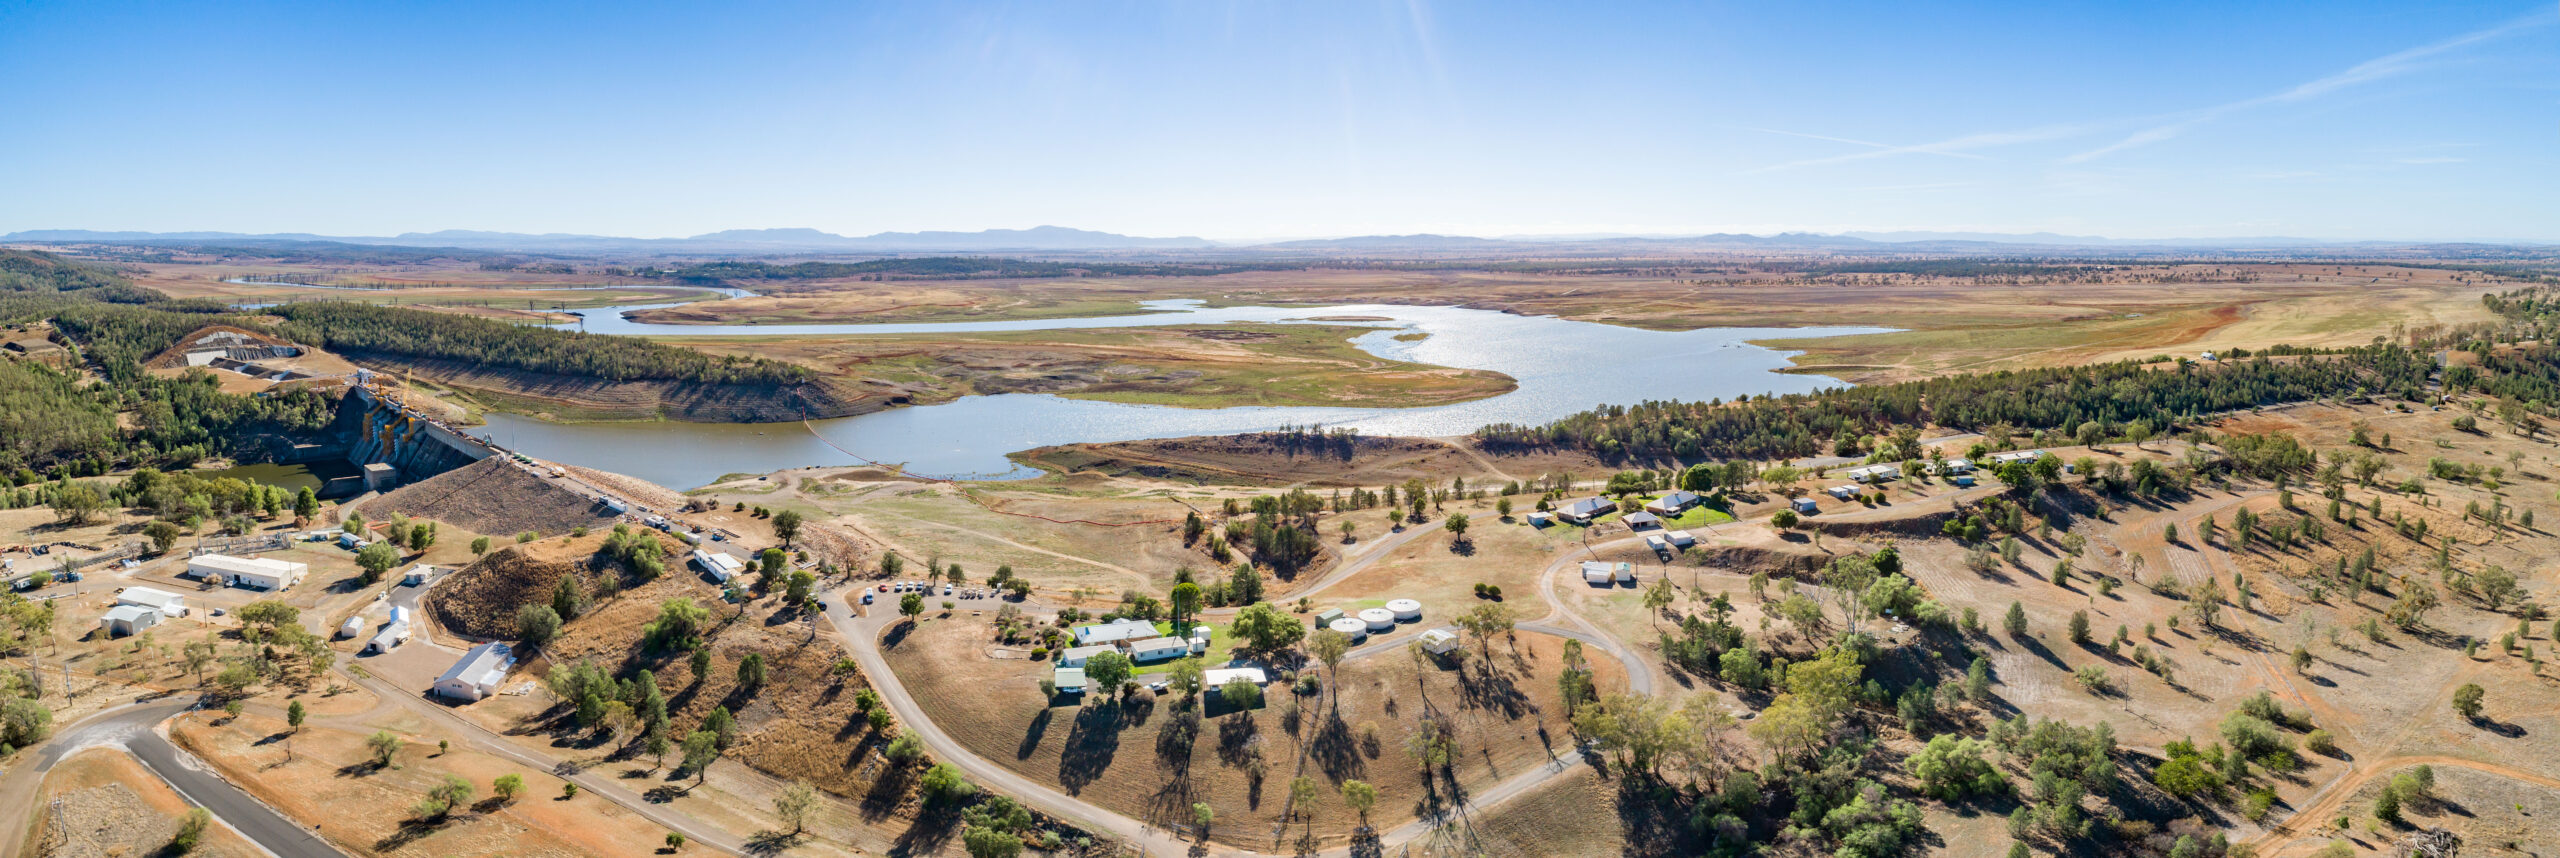 Drop-in regional drought resilience plan sessions to be held across Narrabri shire